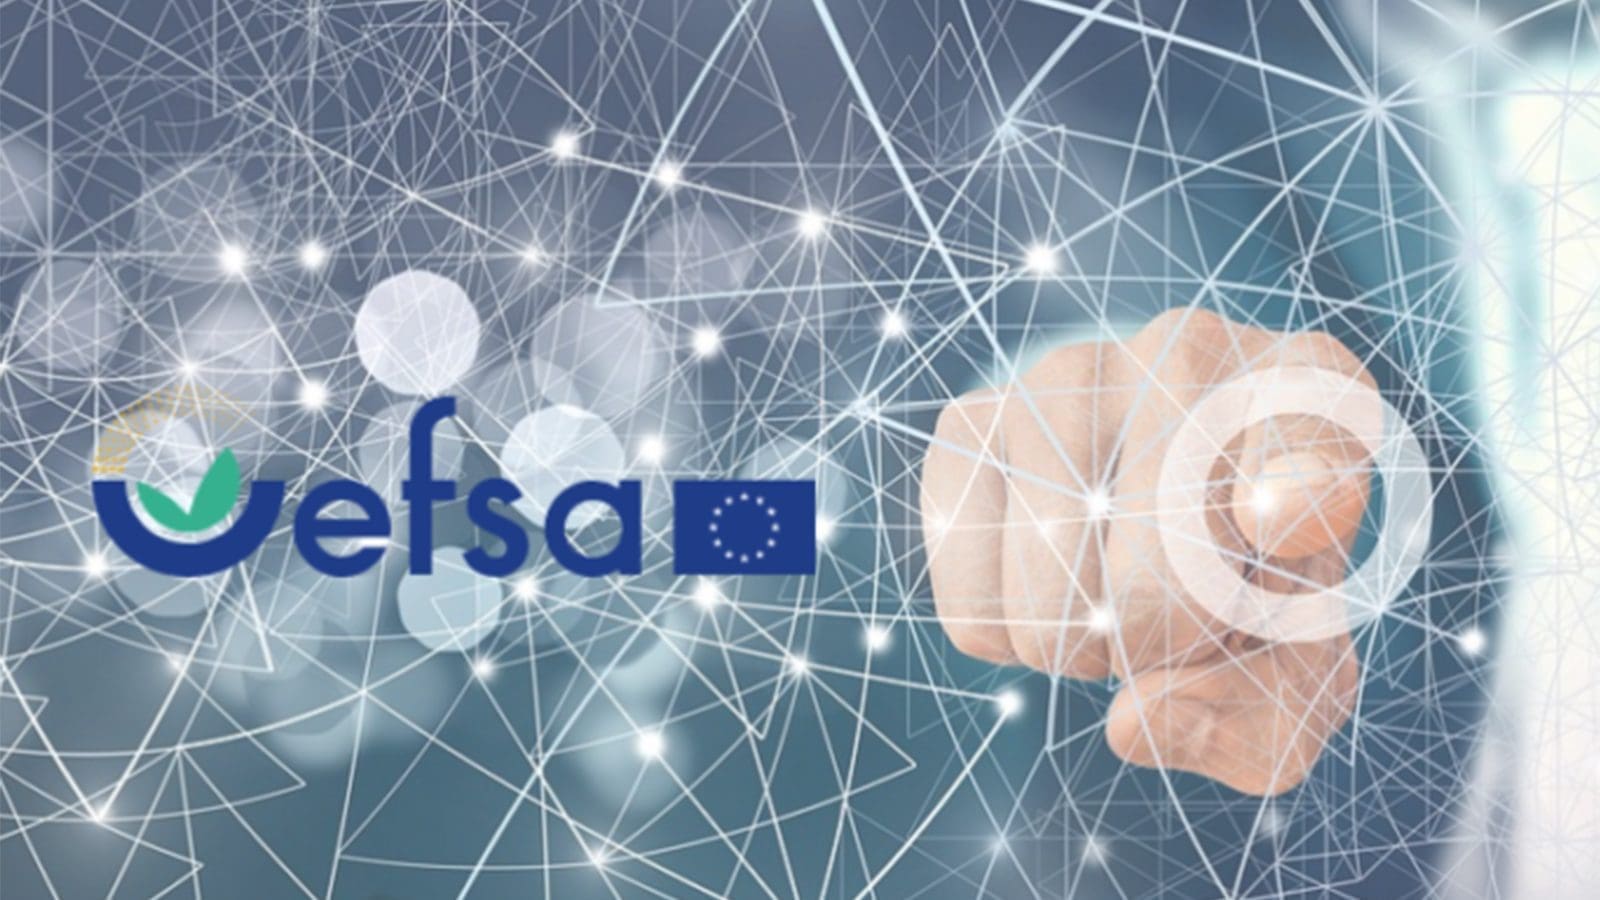 EFSA launches database project for risk assessment of novel foods